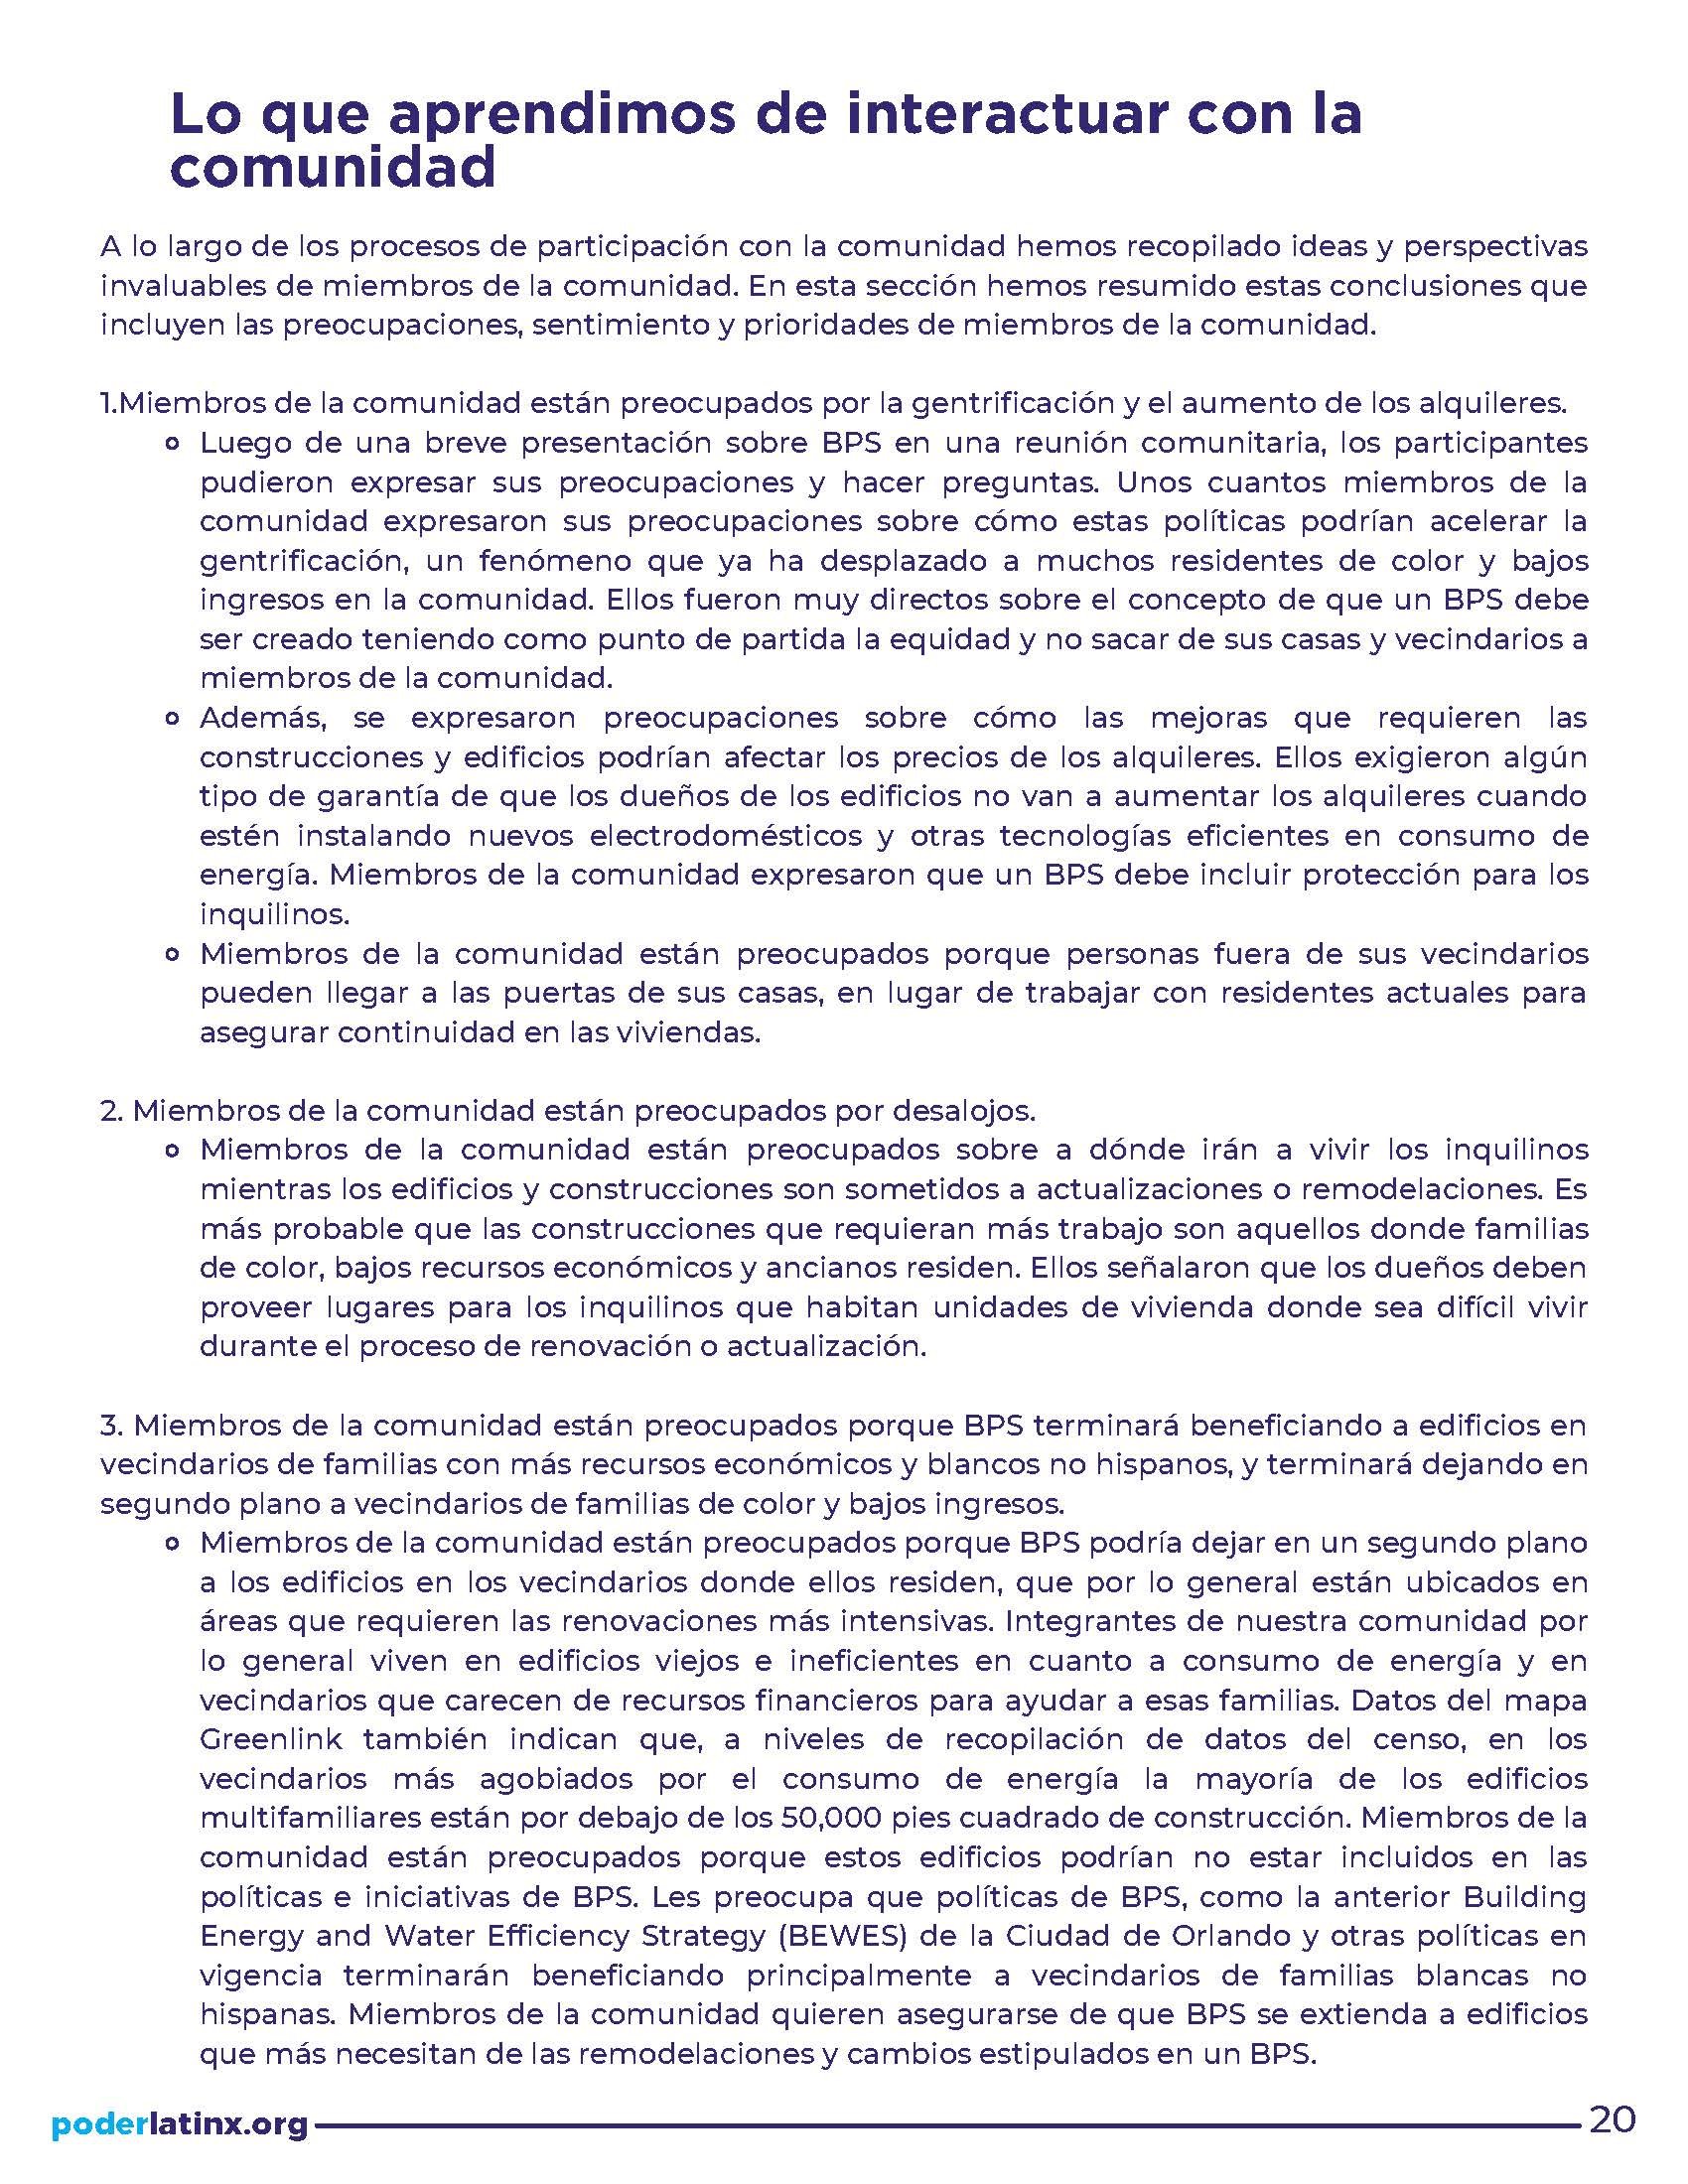 IMT Report - Spanish_Page_20.jpg